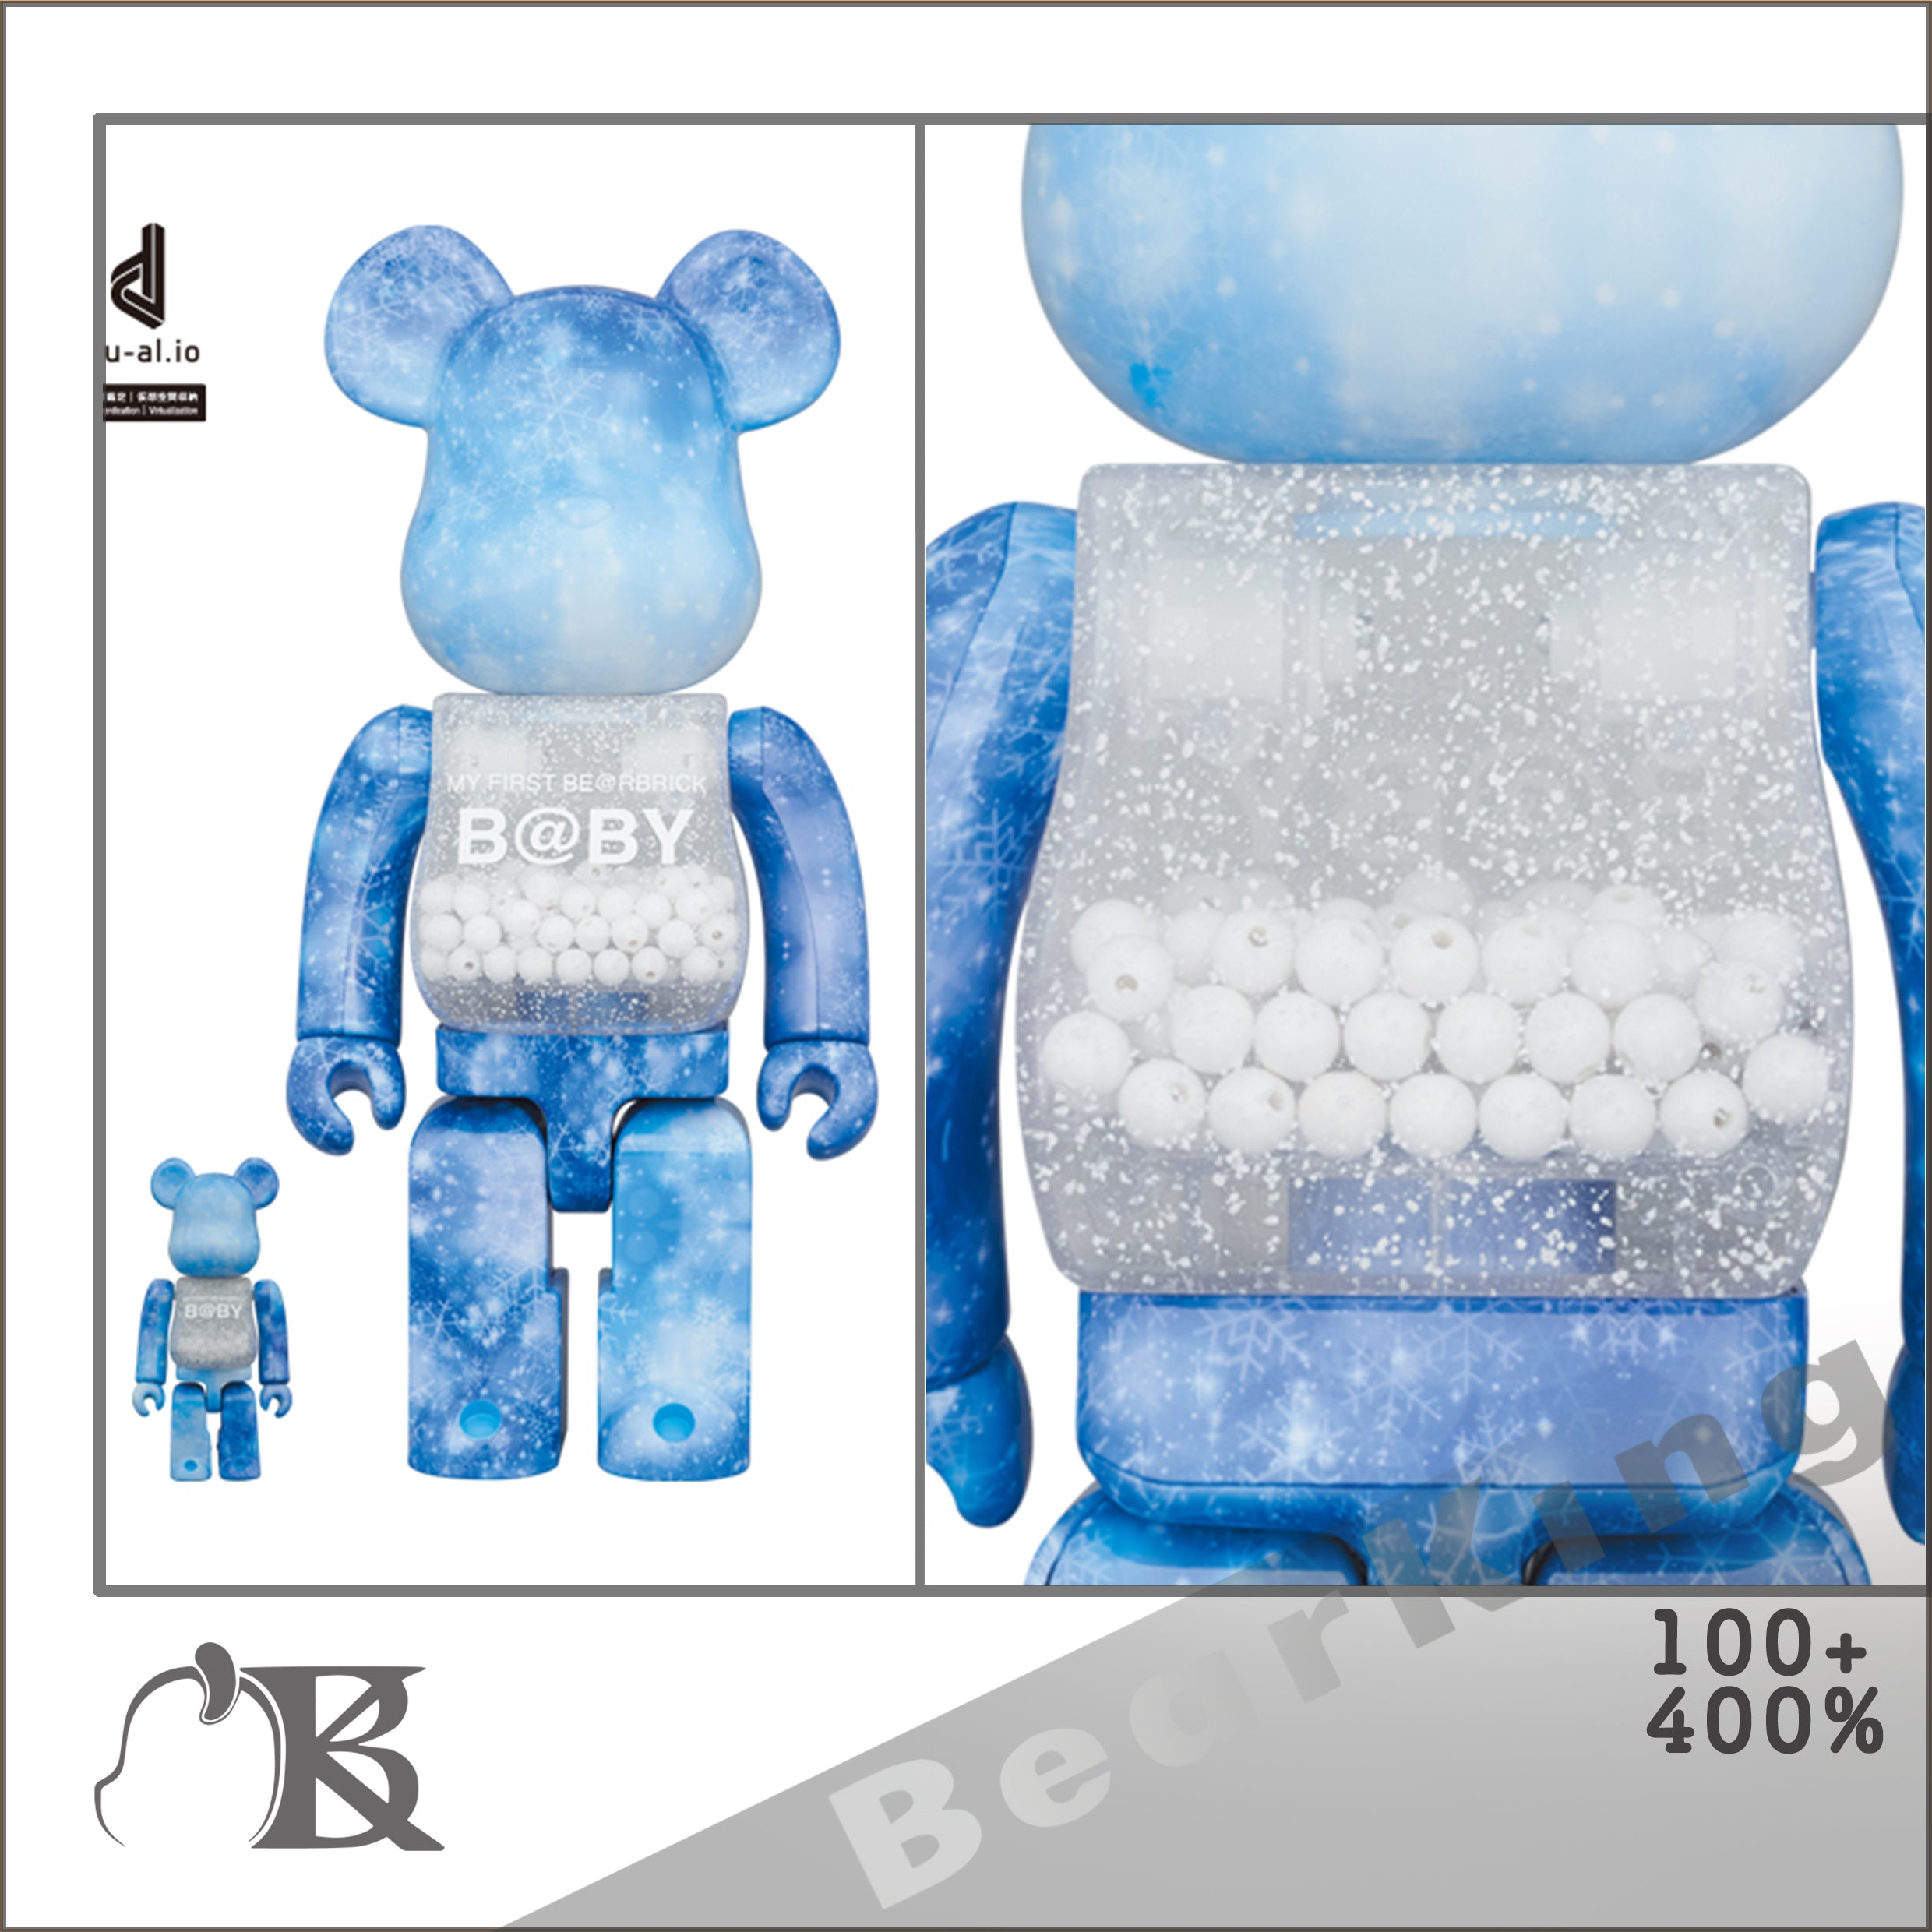 MY FIRST BE@RBRICK B@BY WATER CREST - フィギュア